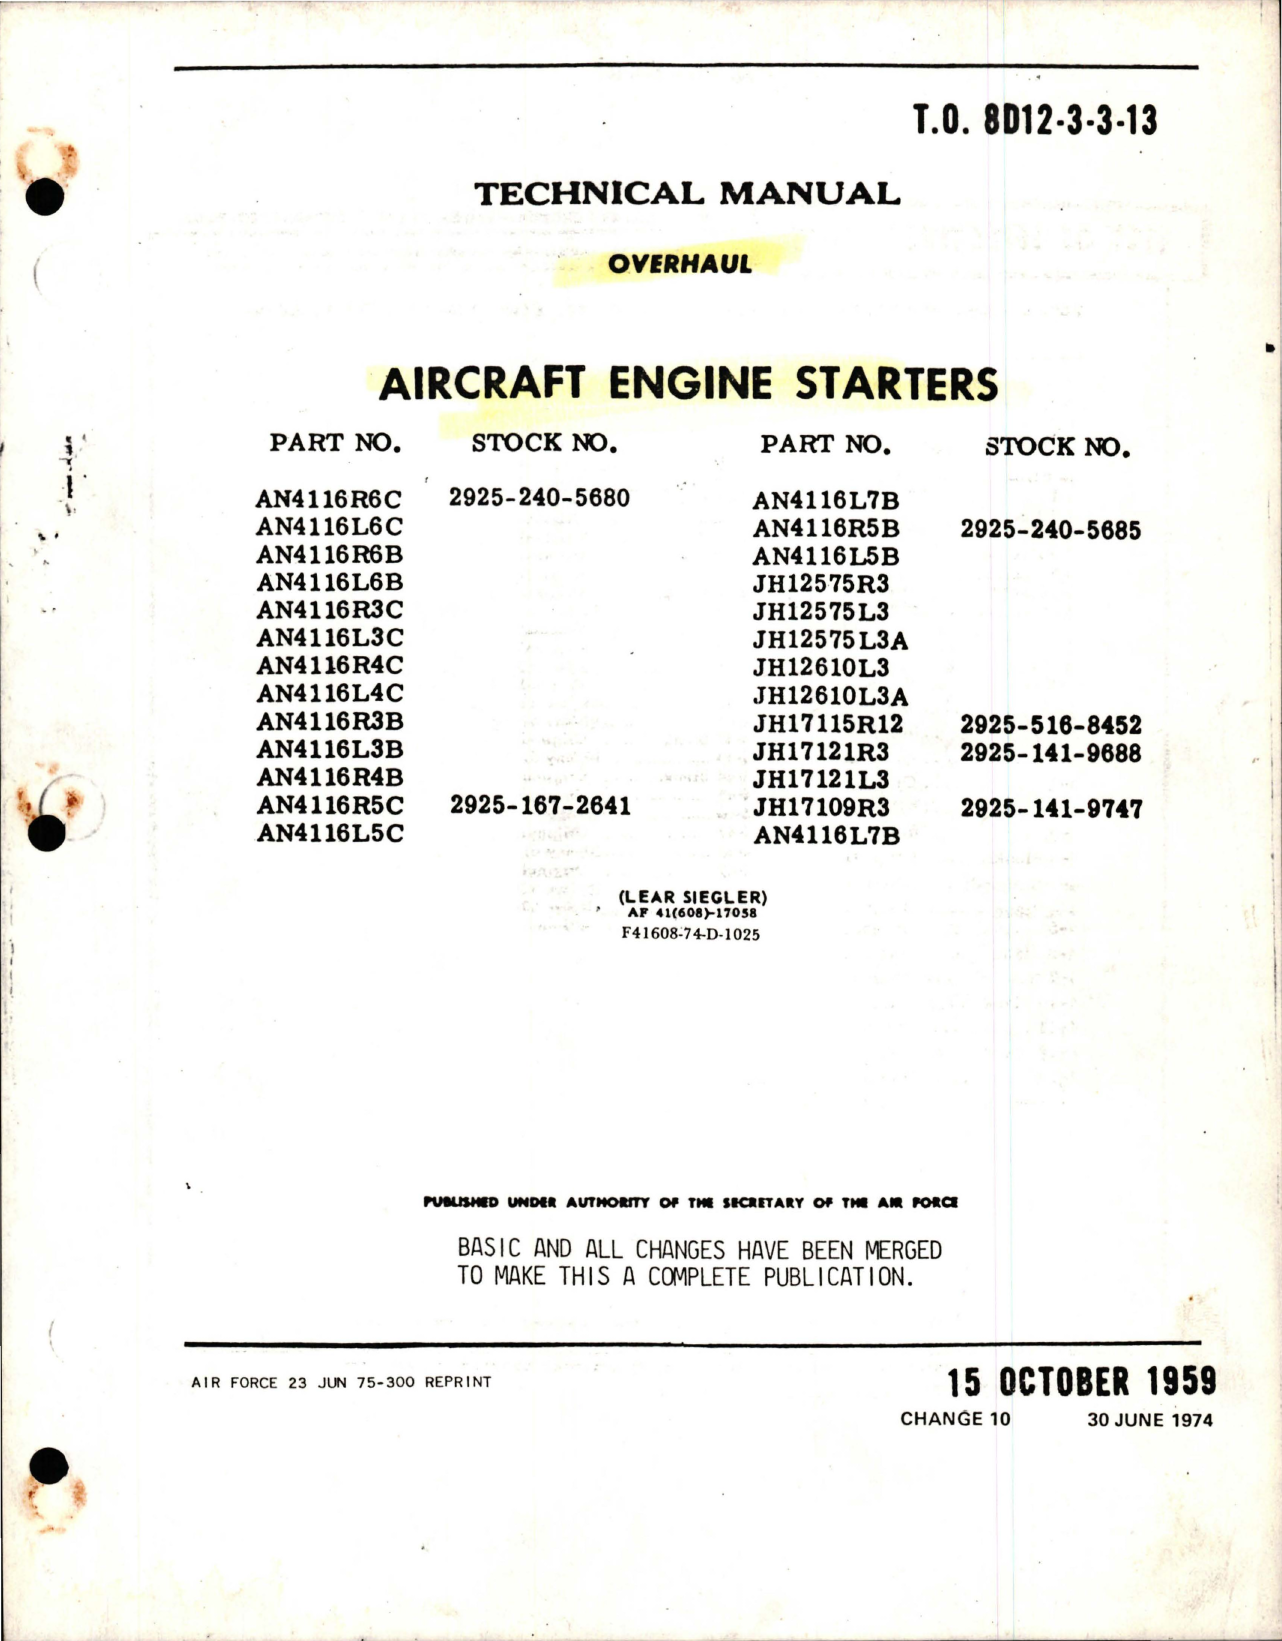 Sample page 1 from AirCorps Library document: Overhaul for Aircraft Engine Starters